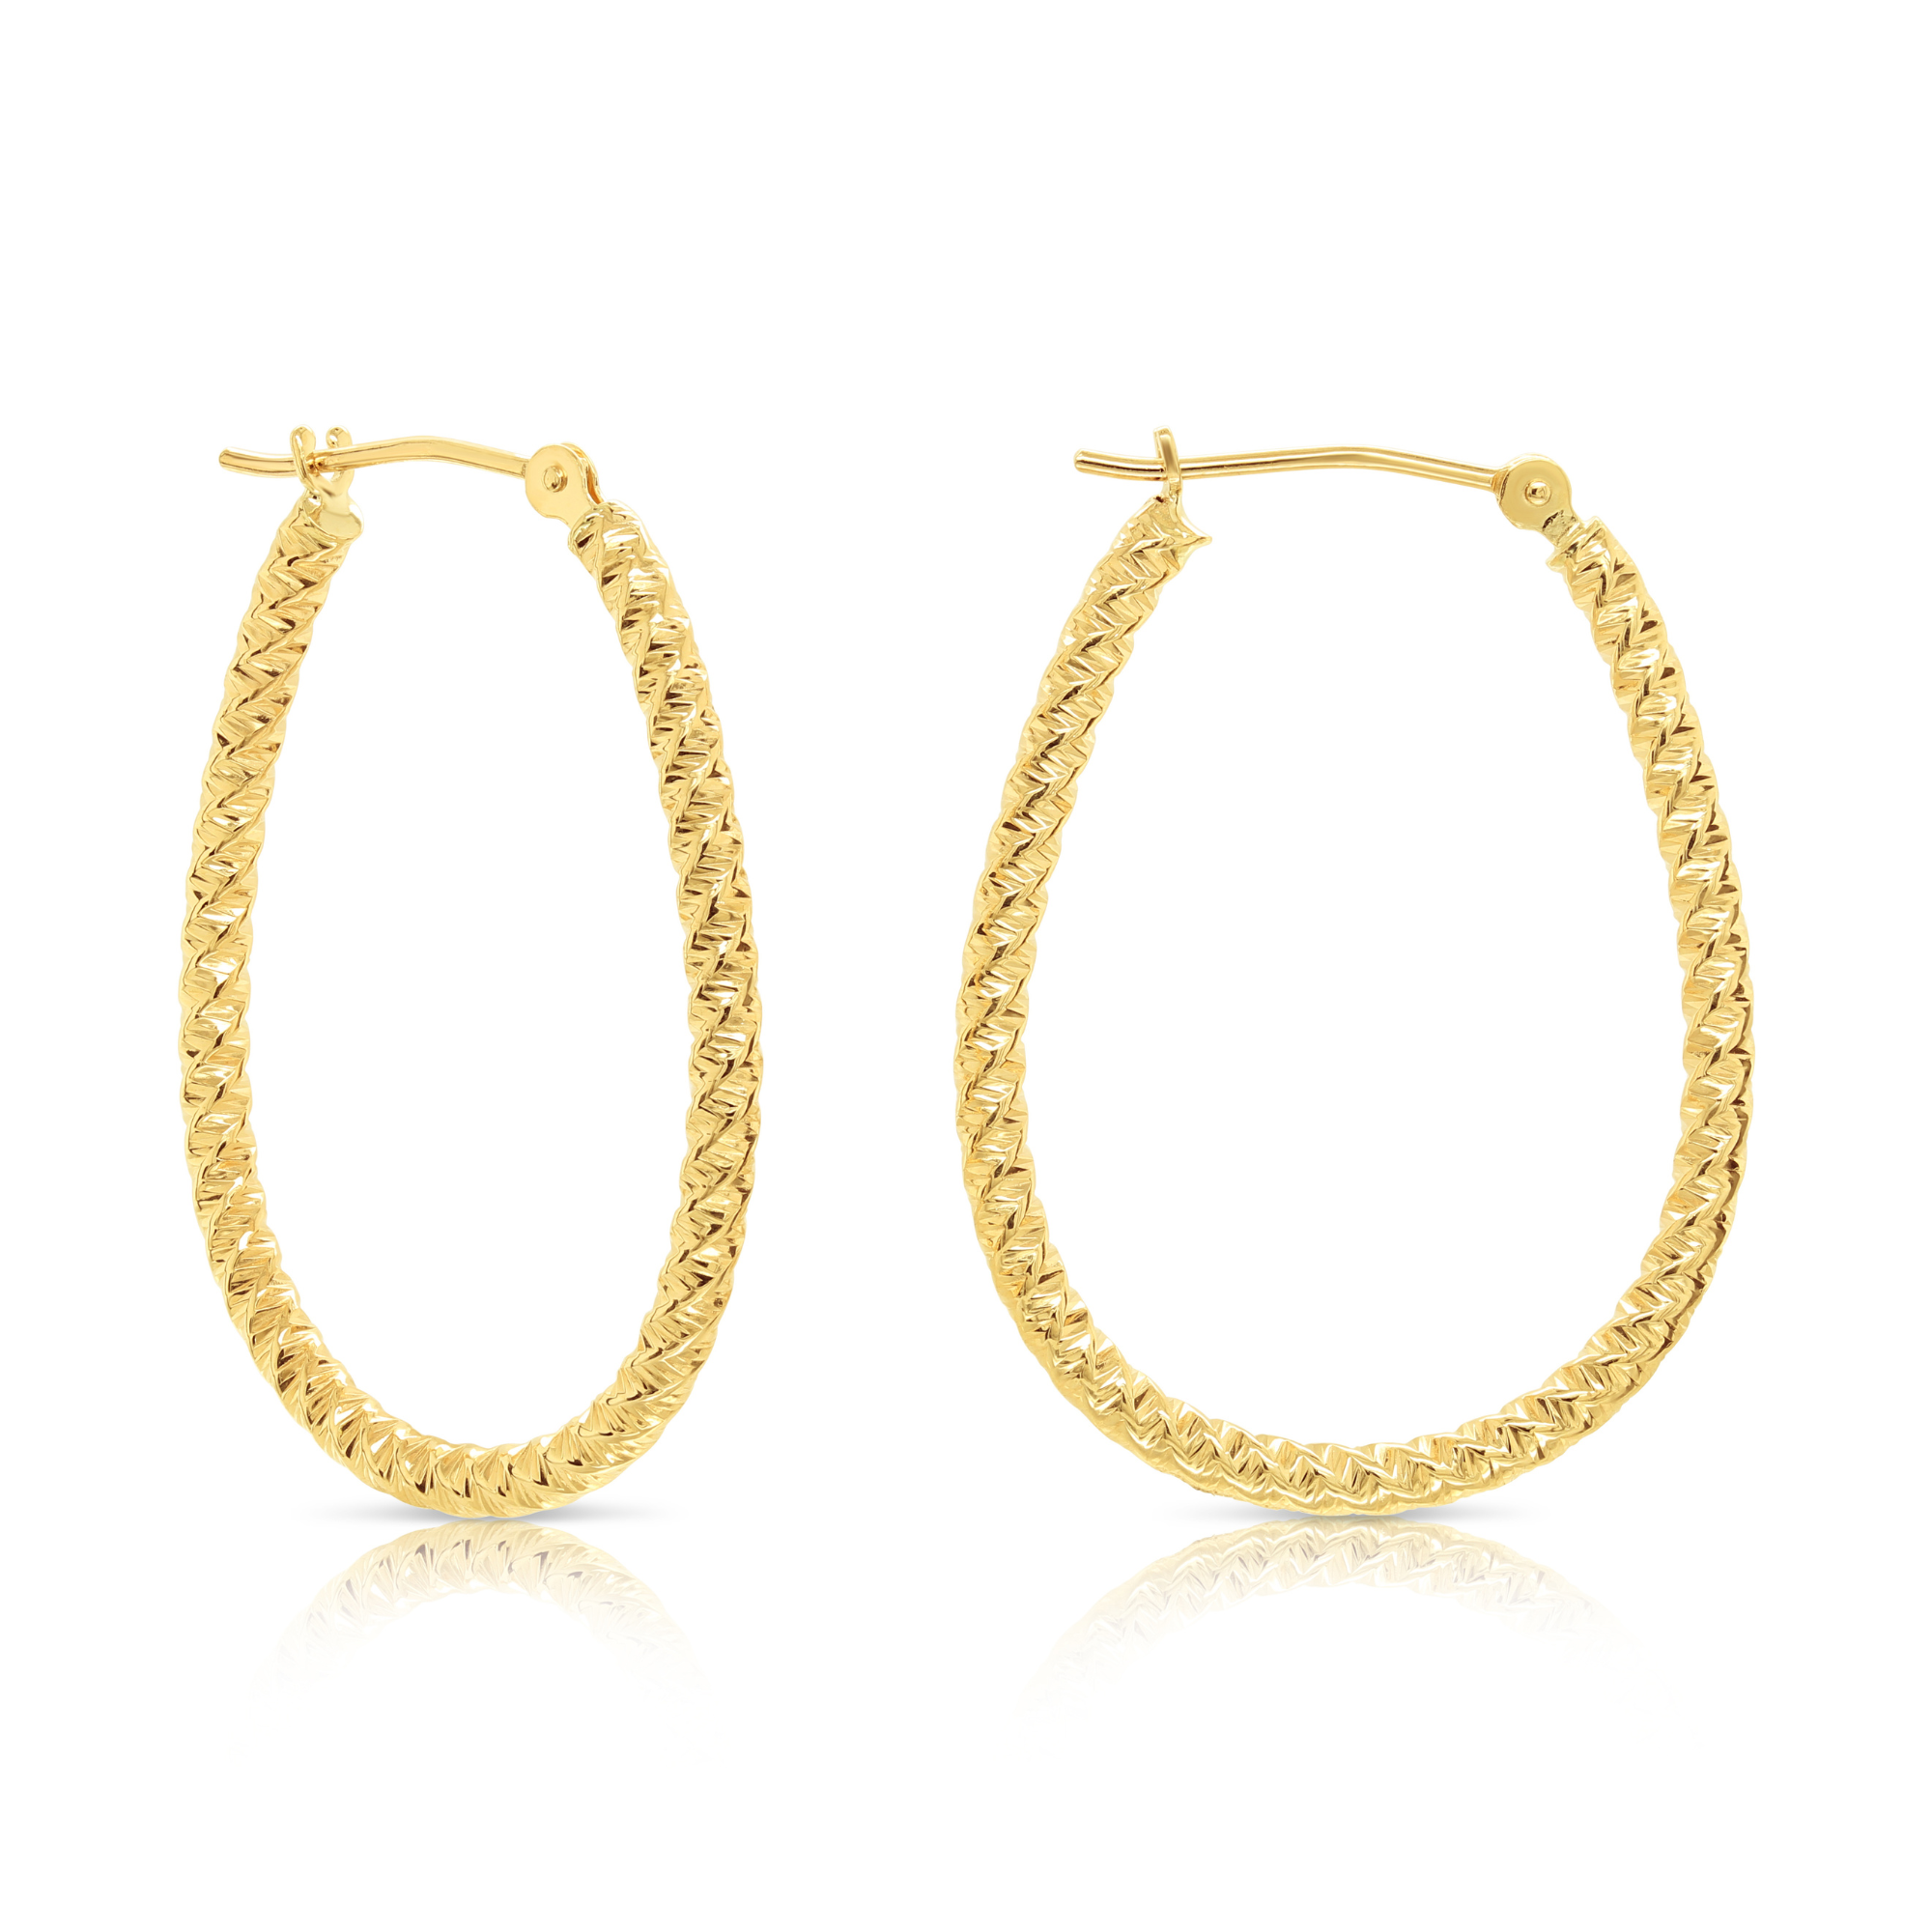 14k Yellow Gold Oval Hoops with Spiral Diamond Cuts, The Twist Collection, 30mm